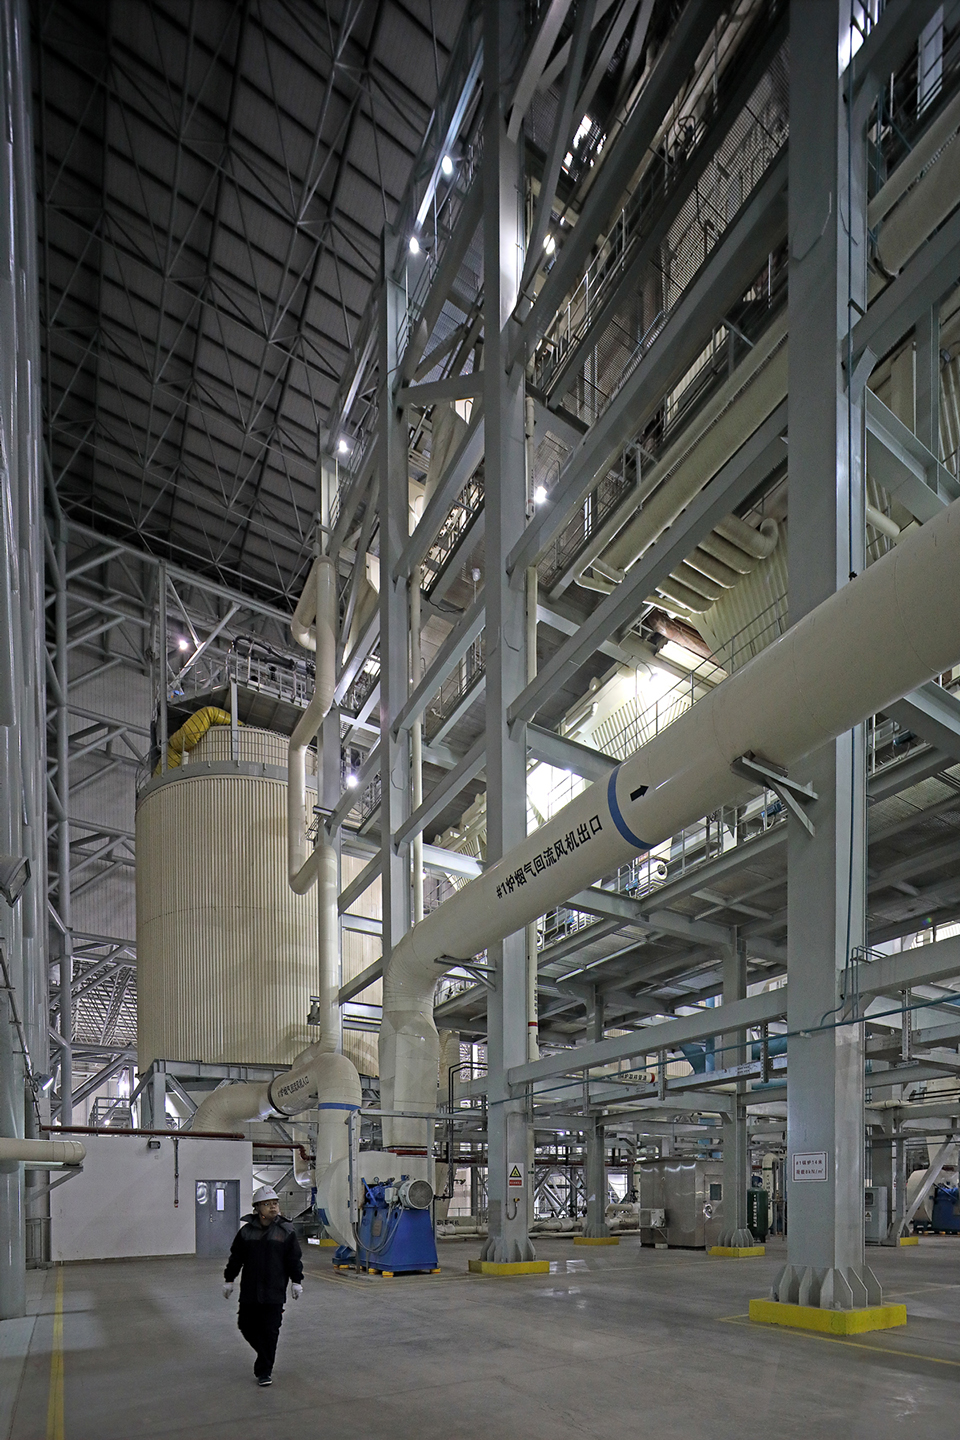 016-incineration-center-of-domestic-waste-comprehensive-treatment-plant-at-chaoy.jpg